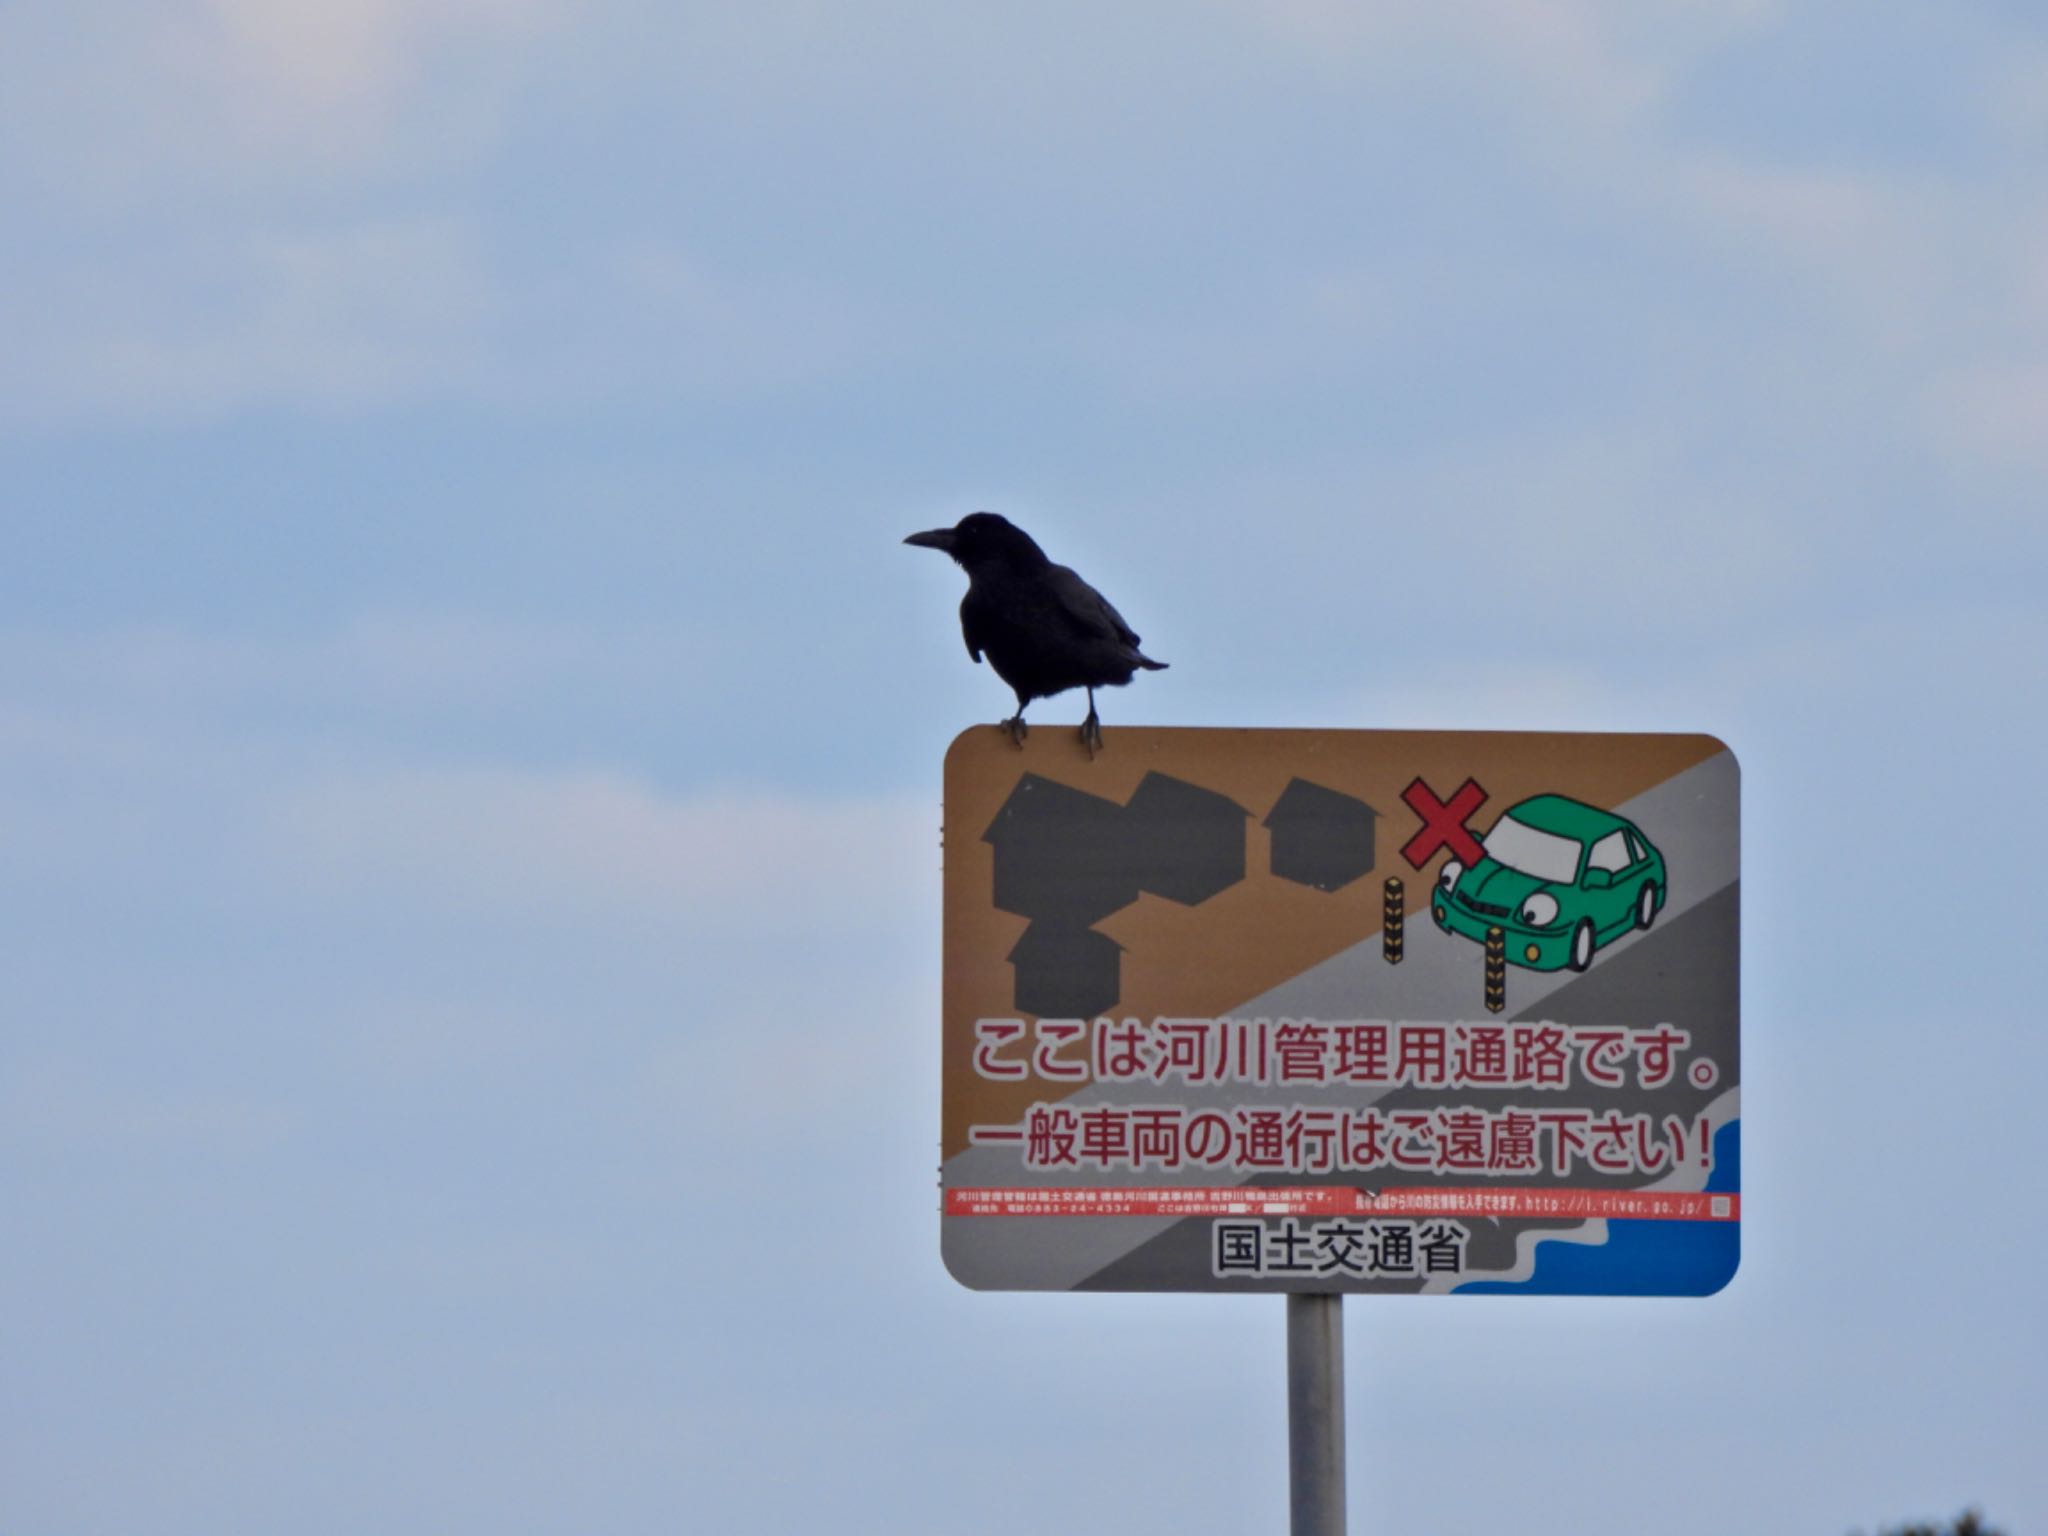 Photo of Carrion Crow at 吉野川河口 by クロやん